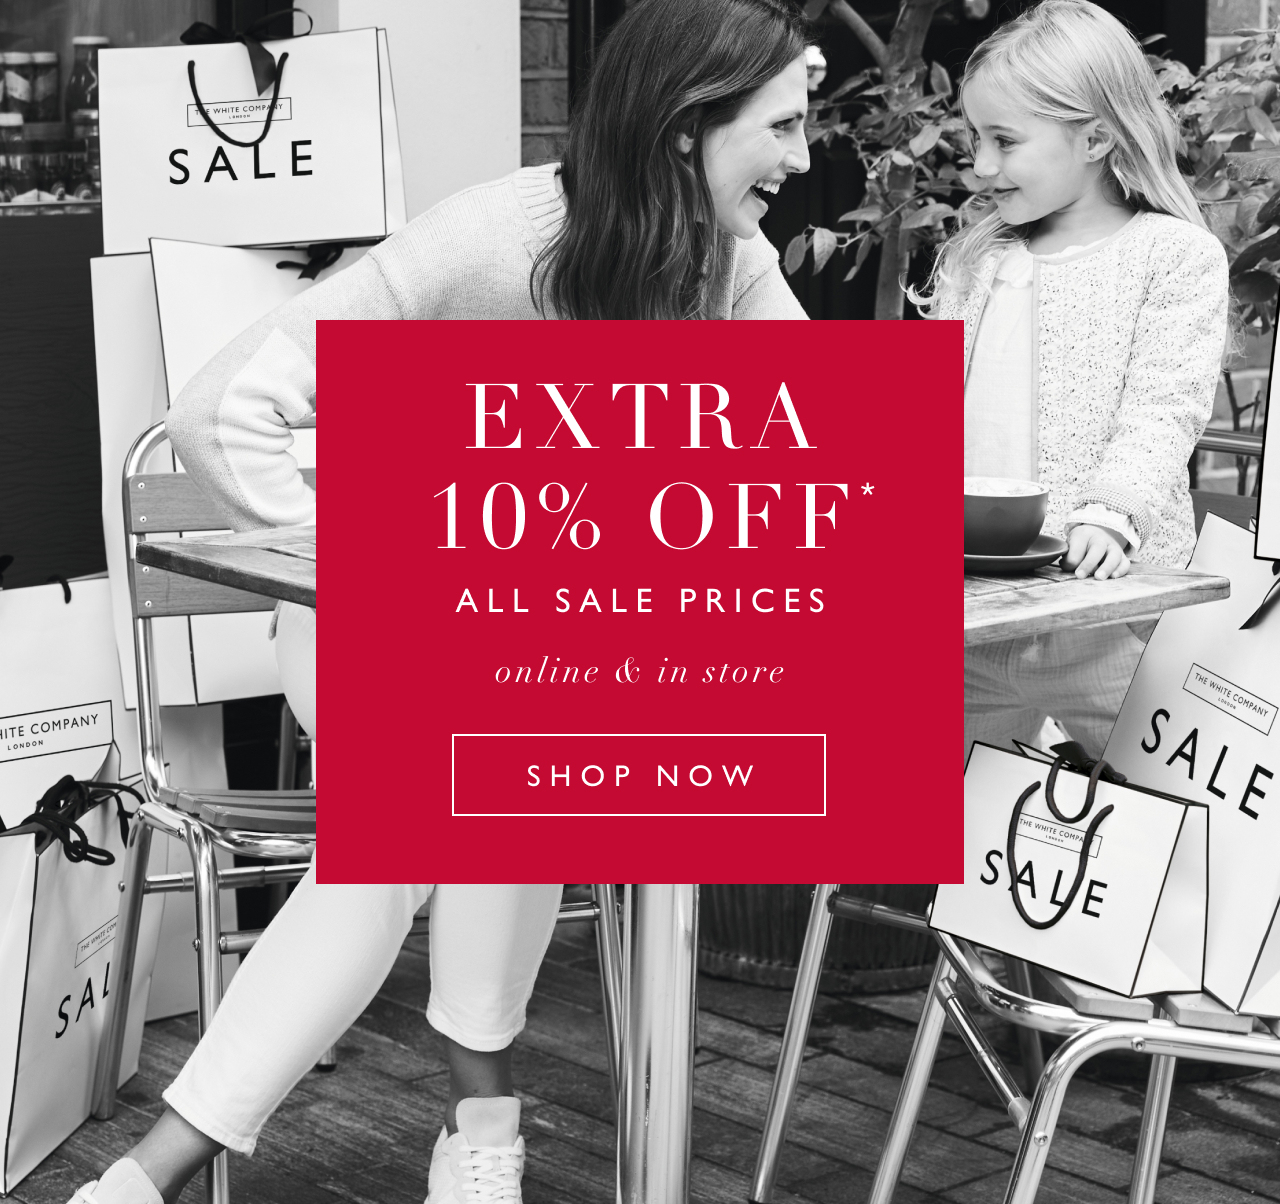 EXTRA 10% OFF ALL SALE PRICES - online & in store - SHOP NOW